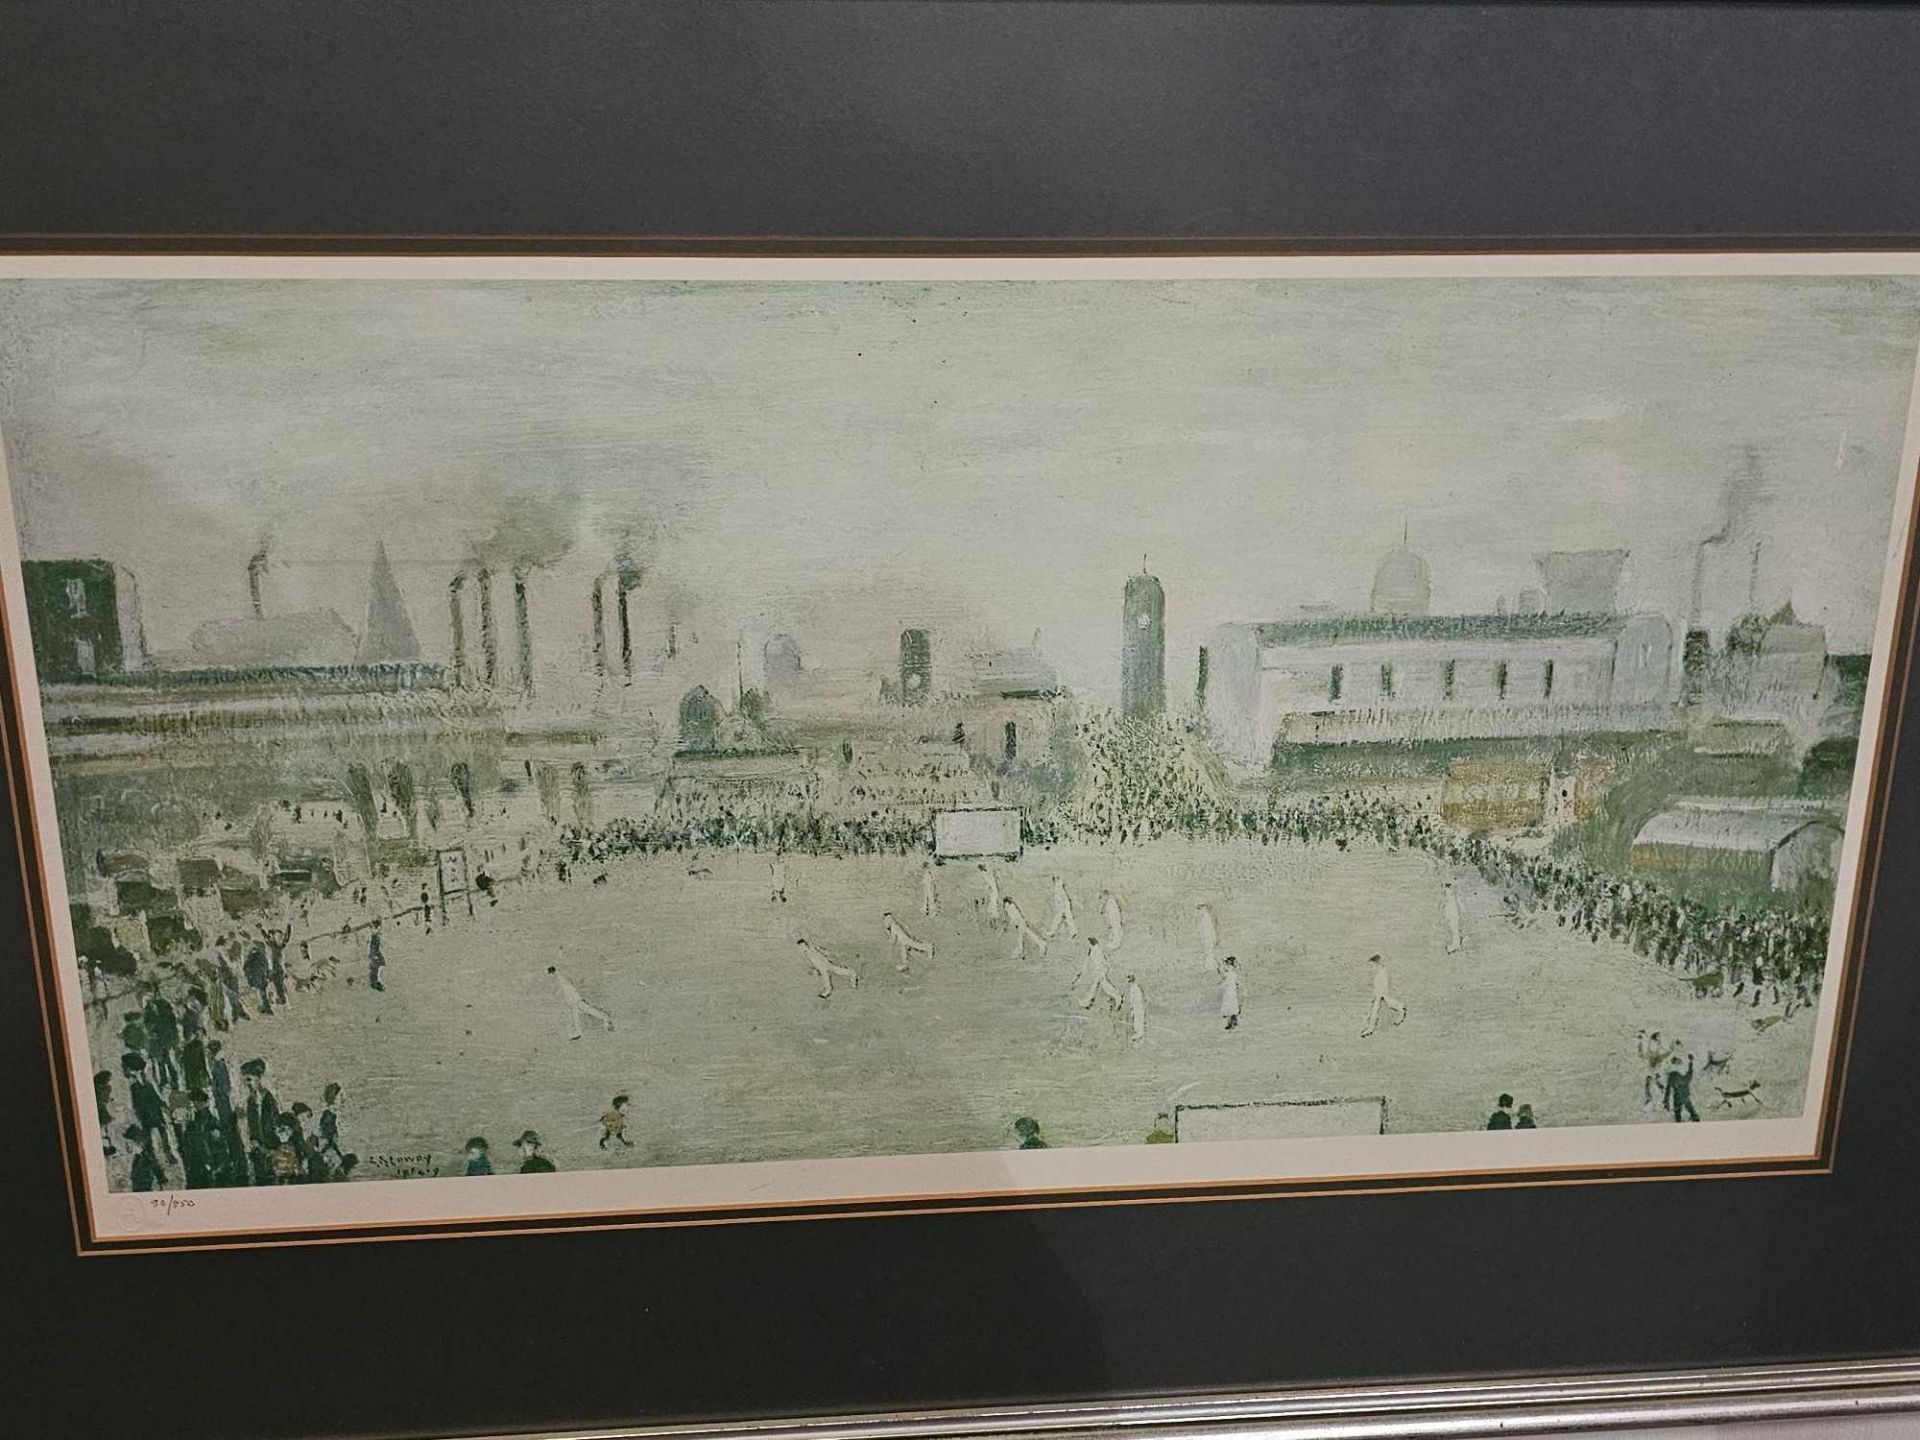 Limited Edition framed print The Cricket Match after  Laurence Stephen Lowry, R.A. (1887-1976) - Image 3 of 5